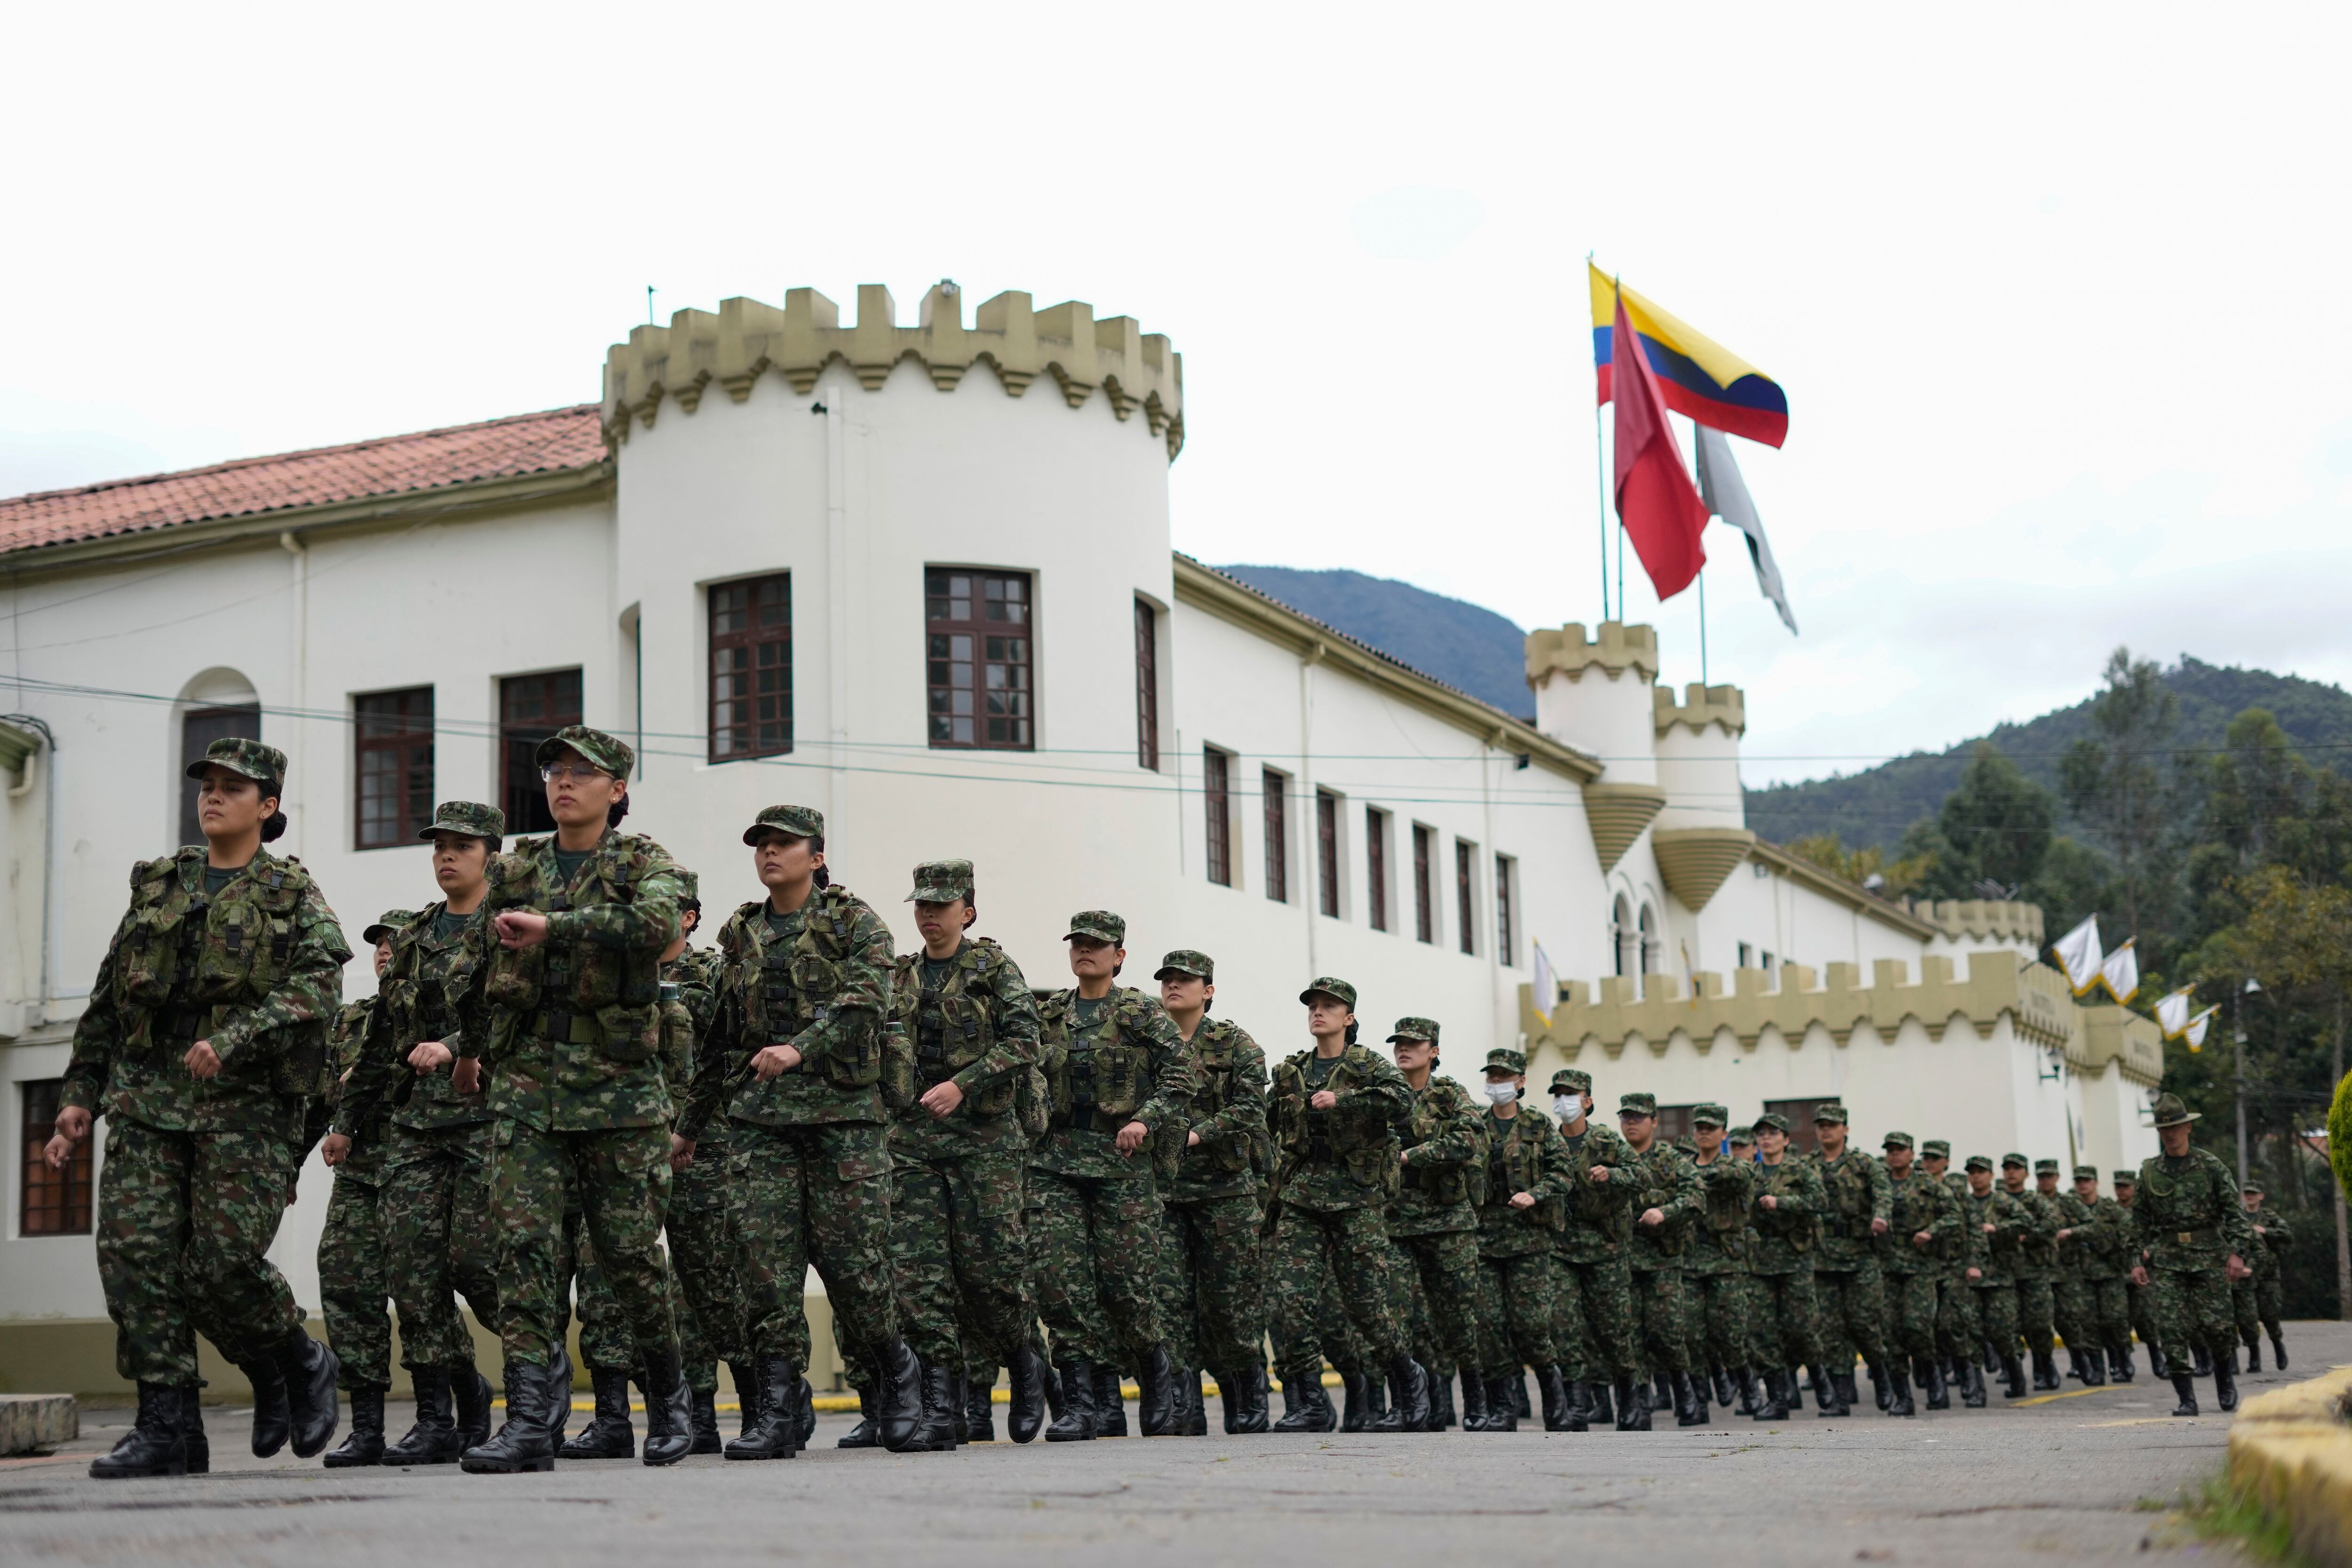 Women enlist in Colombia's army for first time in 25 years